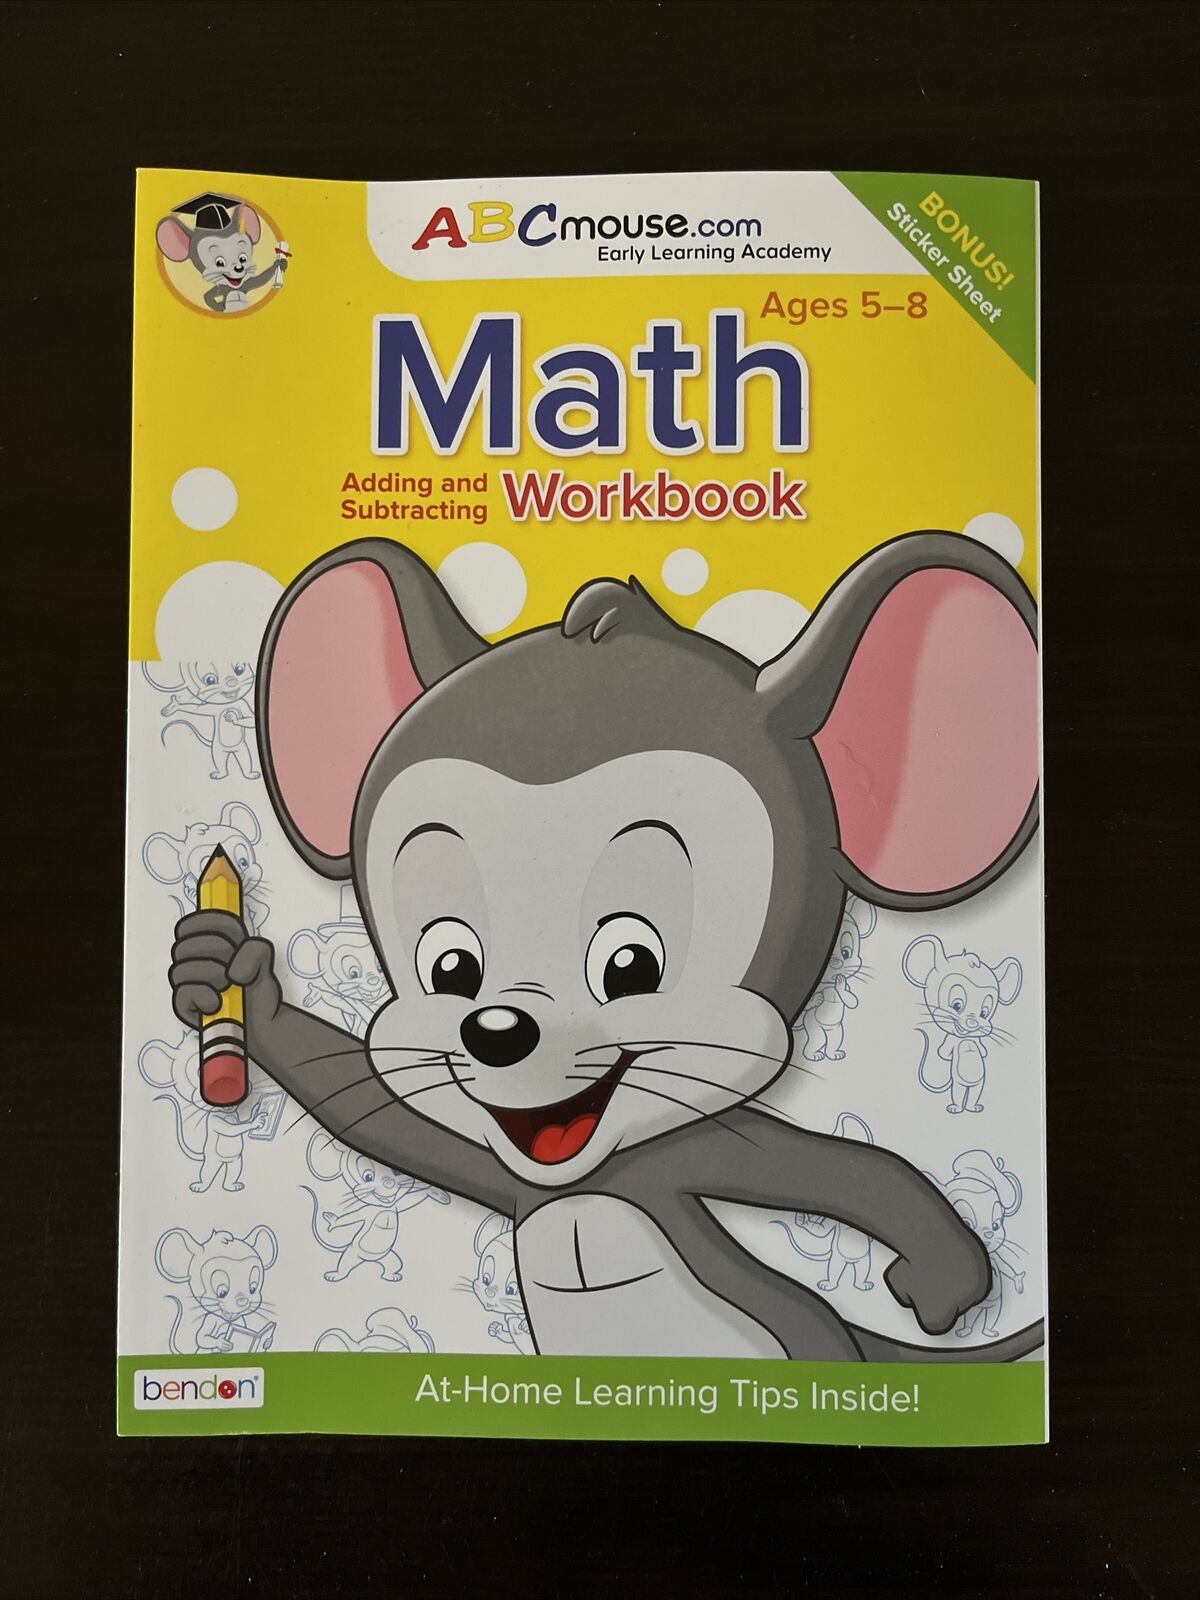 ABC Mouse Workbook - Math Adding and Subtracting Workbook (Ages 5-8) Stickers 